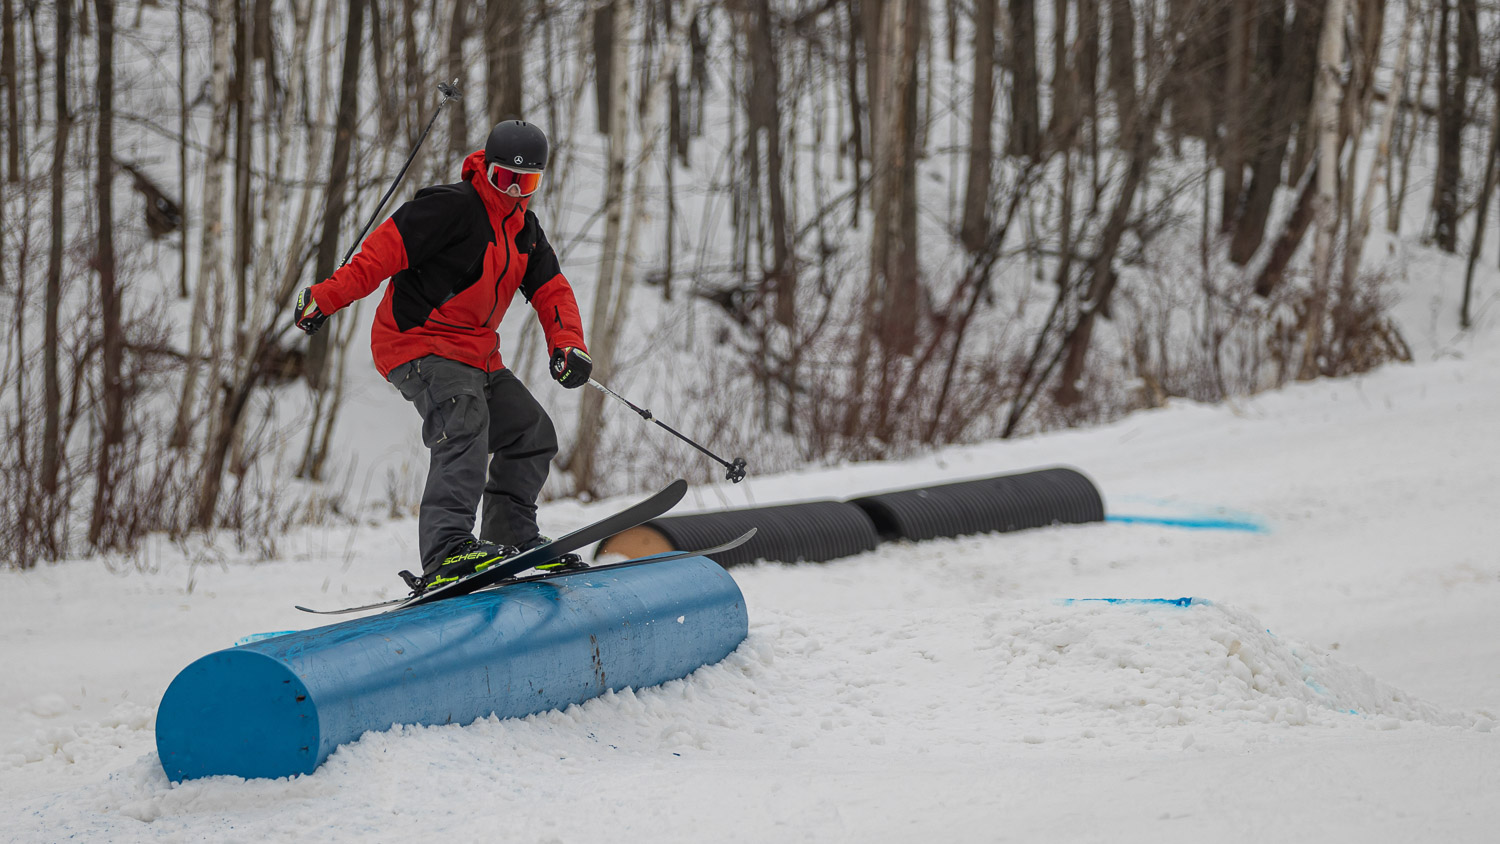 Skier going down rail while Learning to ski in the park at Blue Mountain